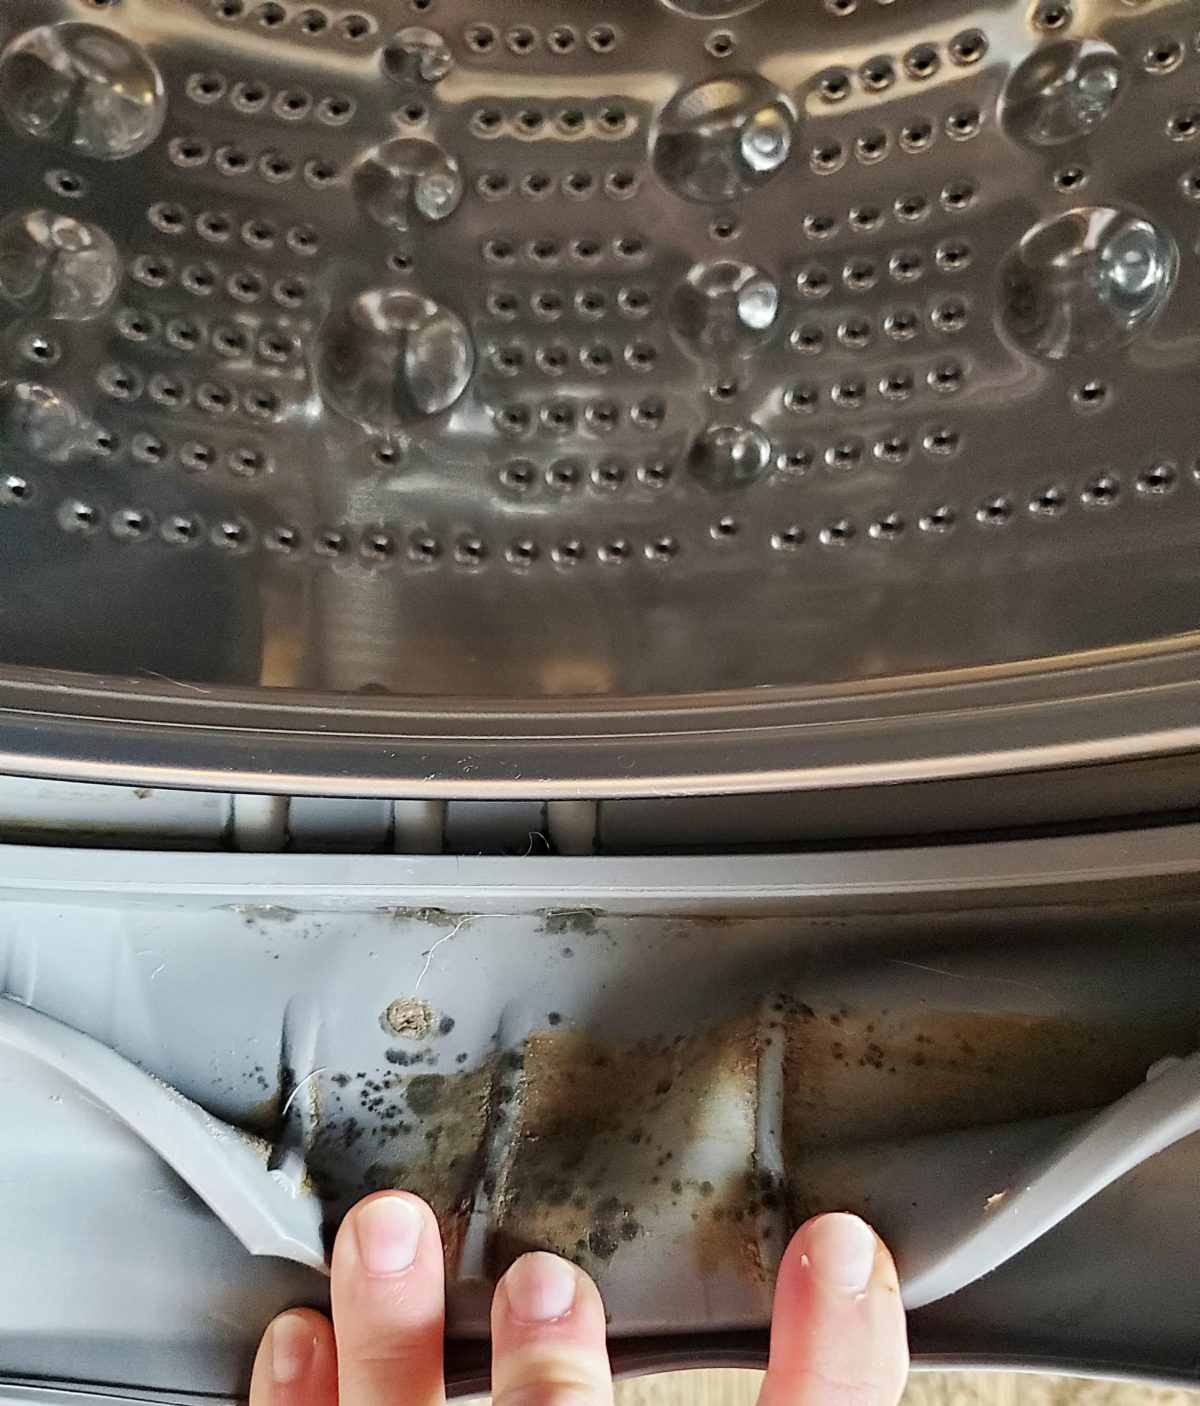 How To Clean Your Front Load Washing Machine - House Becomes Home